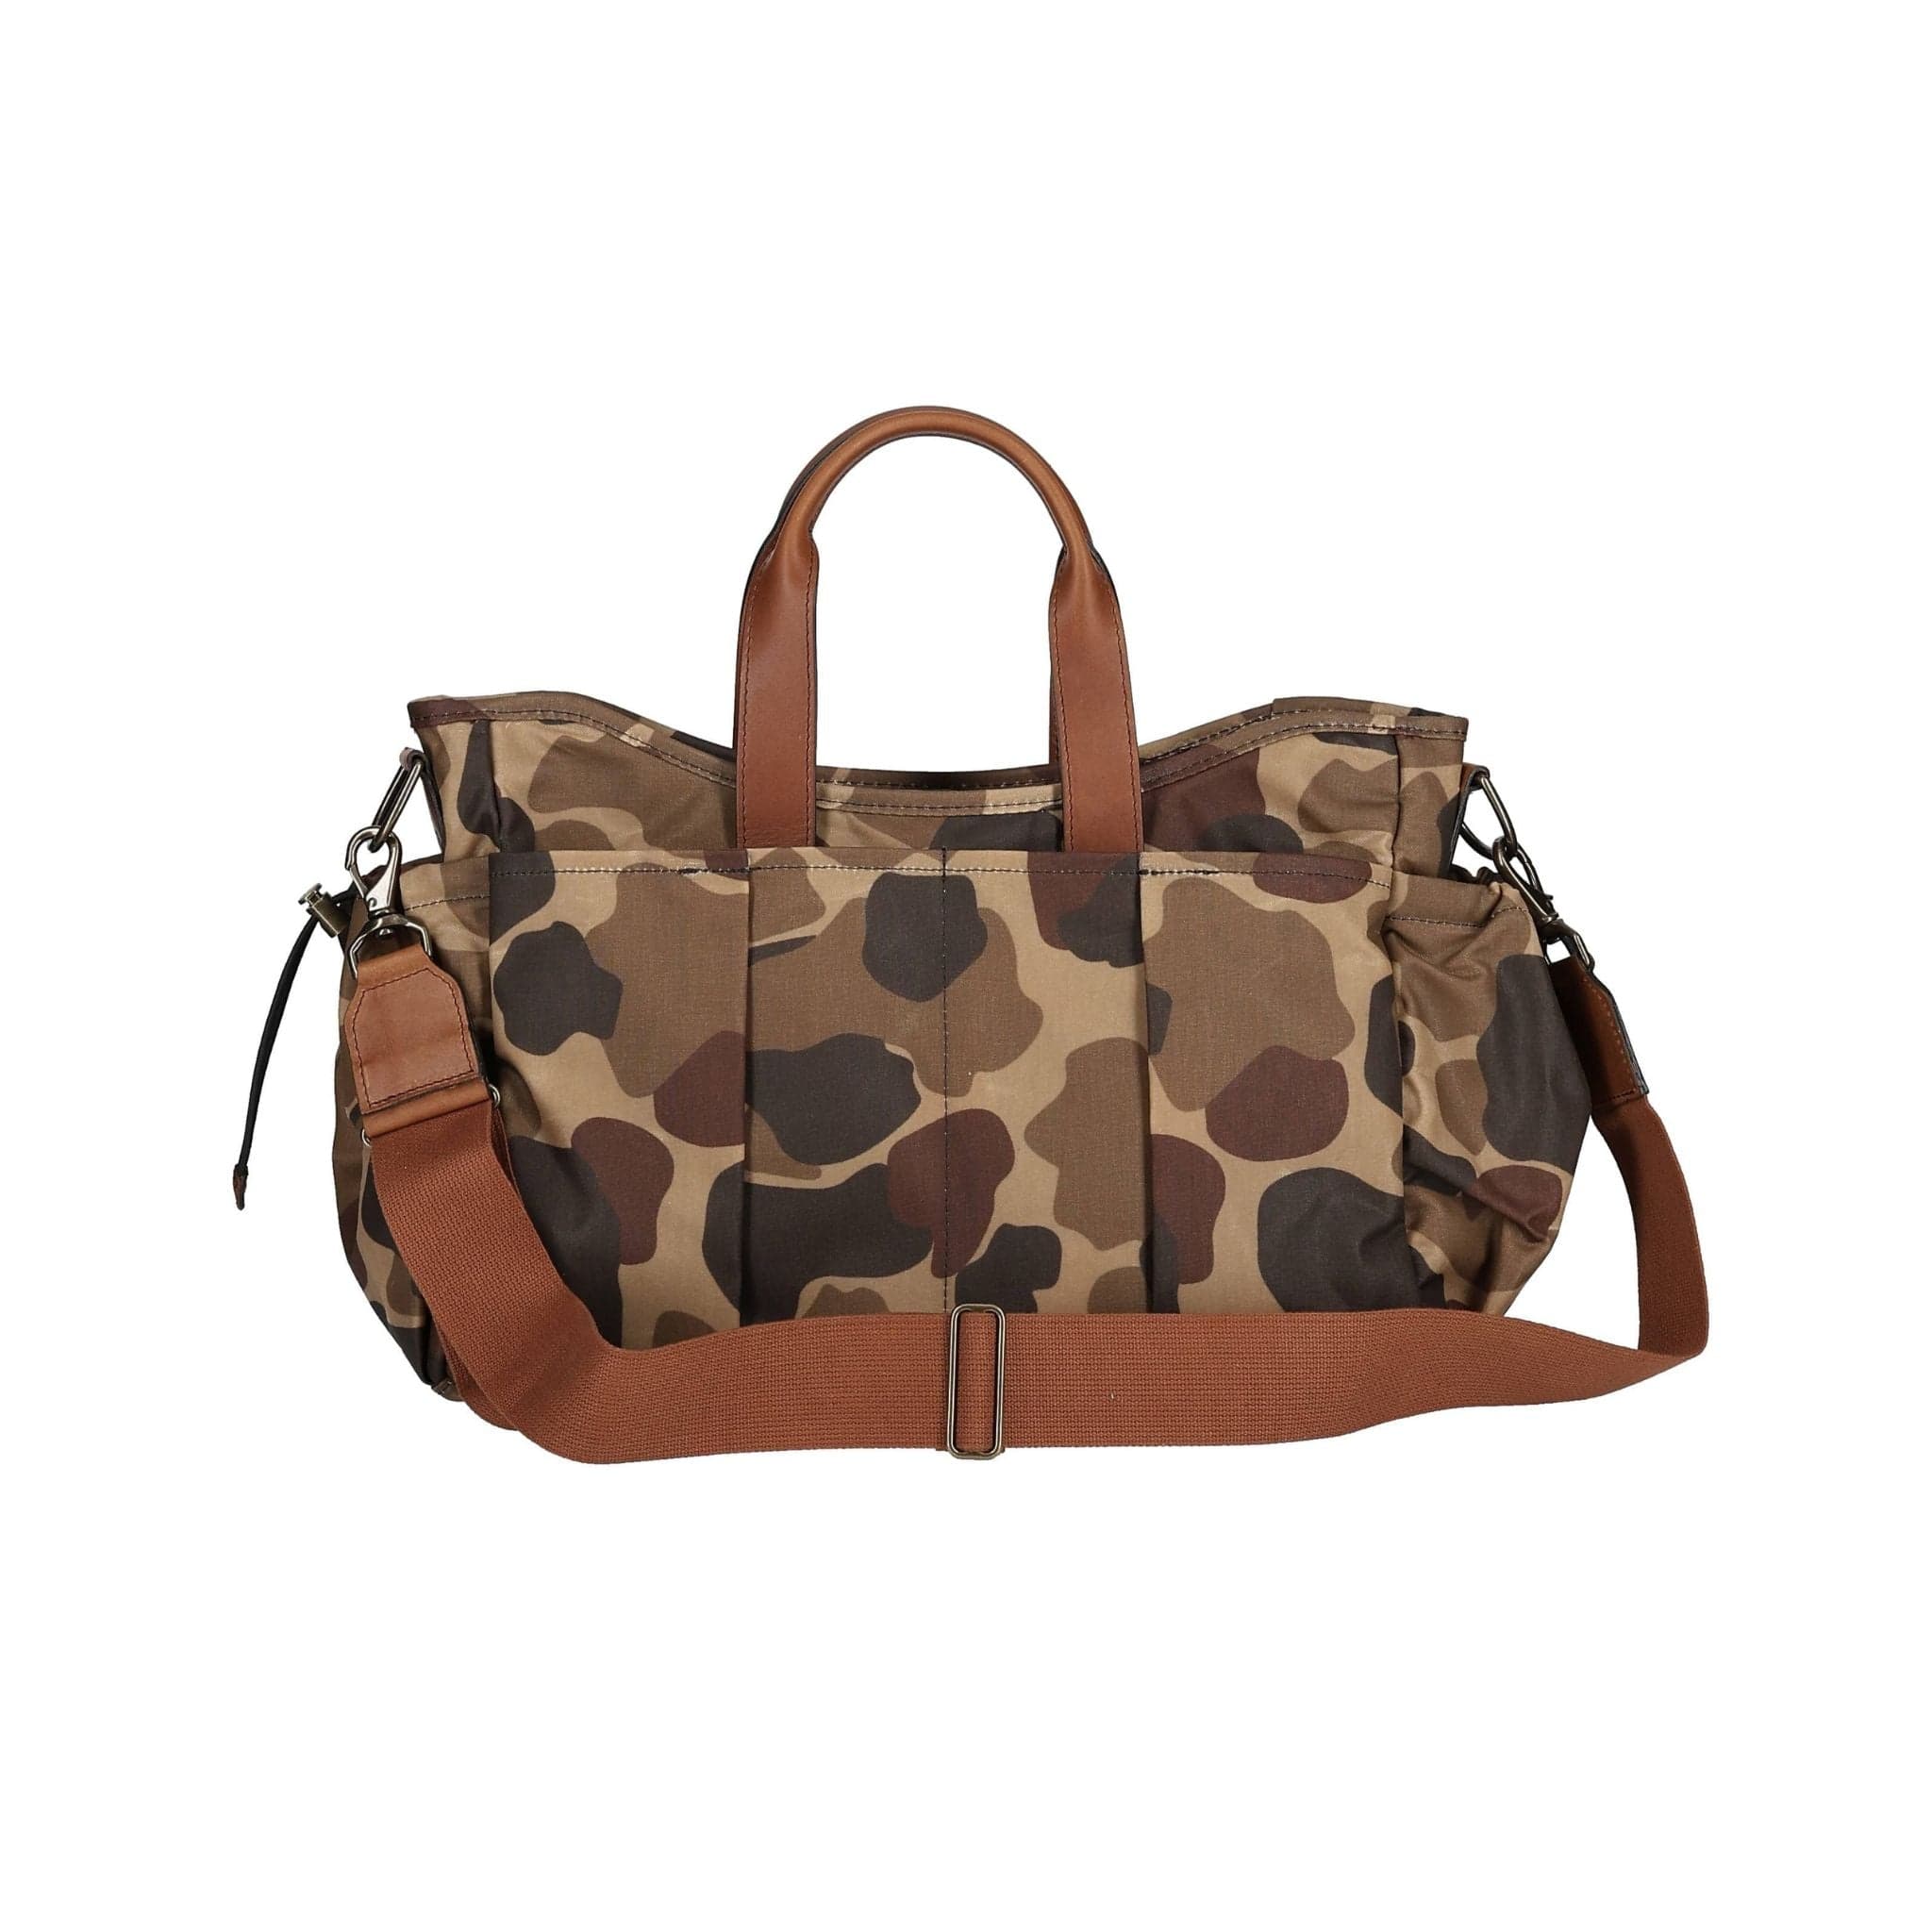 Louis Vuitton in Brown Thomas-DISAPPOINTING! - Review of Brown